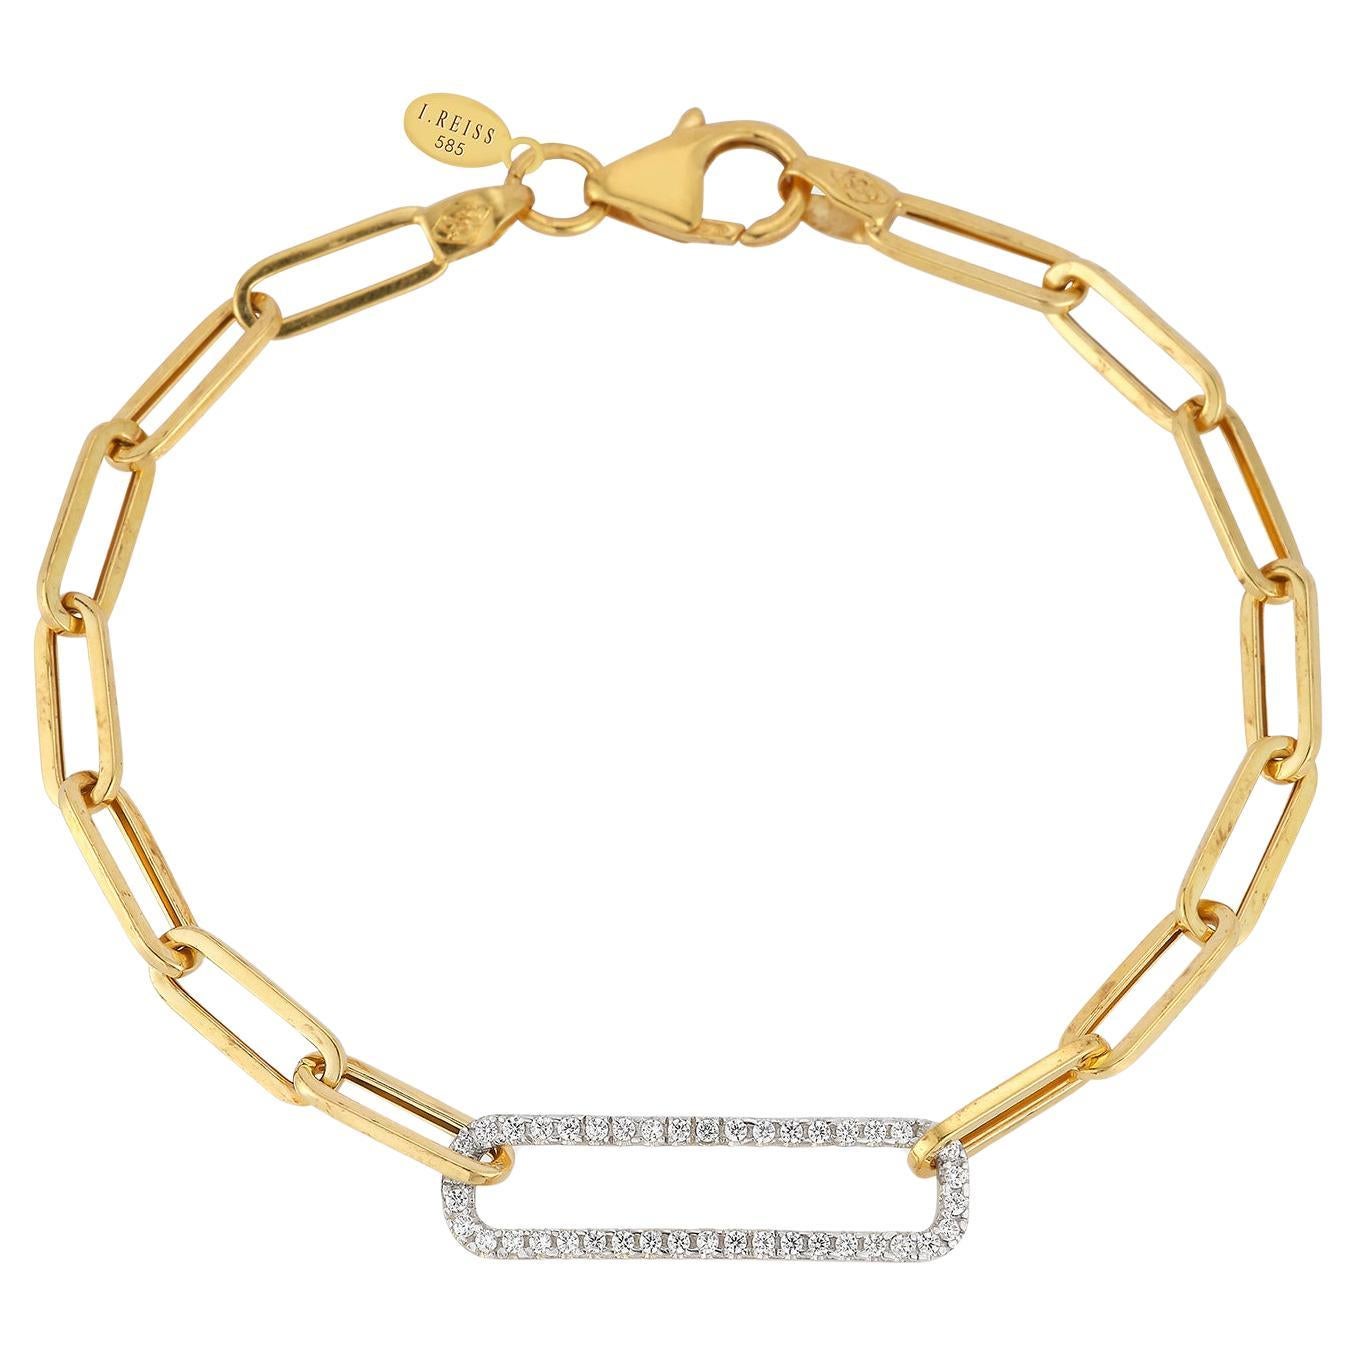 Hand-Crafted 14K Gold 0.25 ct. tw. Open Link Bracelet